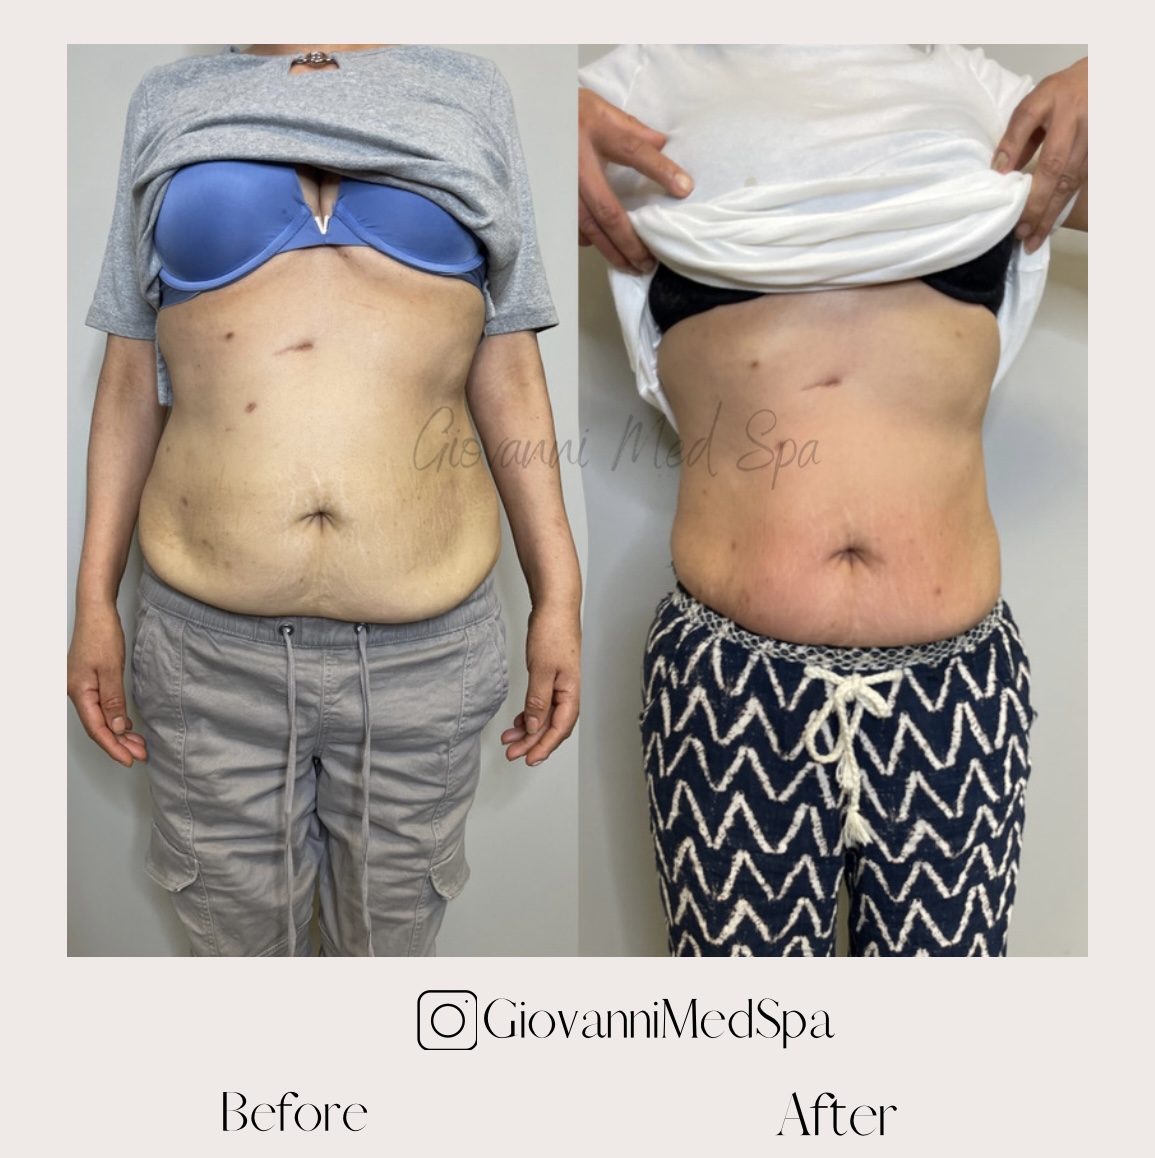 Eves Body Organic MedSpa - Before and After Bra line Lipo